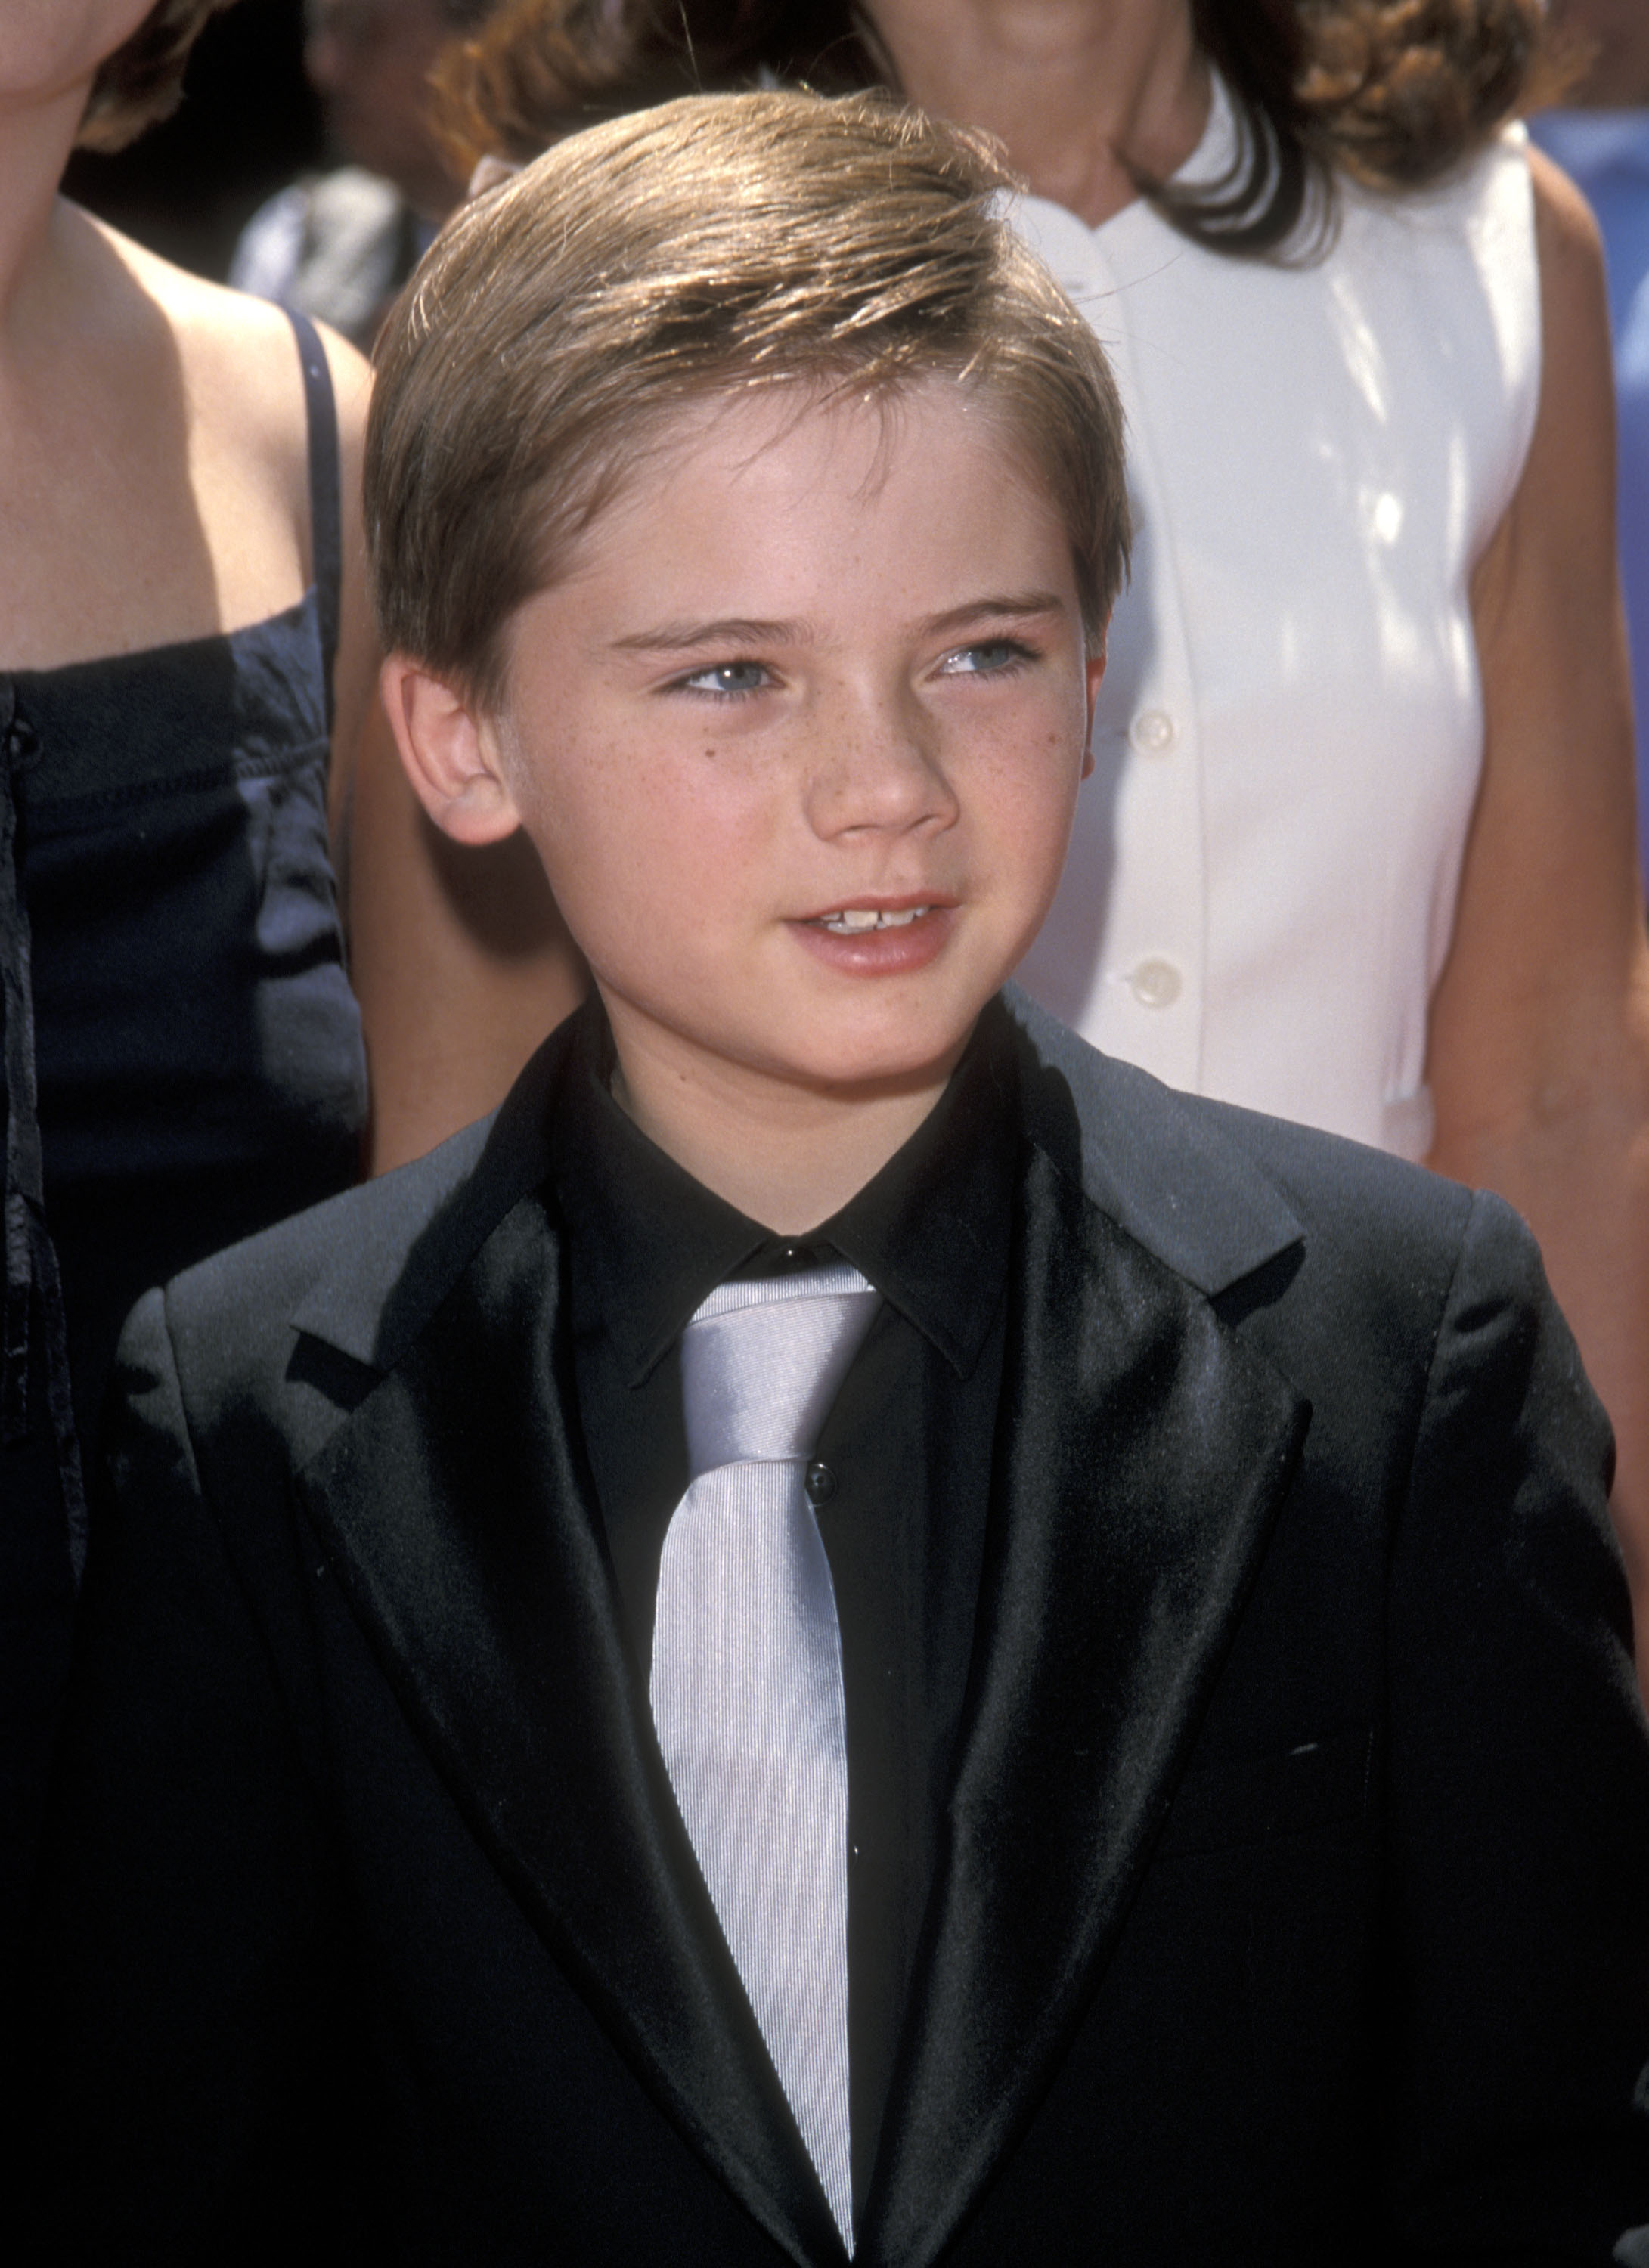 Jake Lloyd at the Westwood premiere of "Star Wars: Episode I - The Phantom Menace" on May 16, 1999 in Westwood, California | Source: Getty images